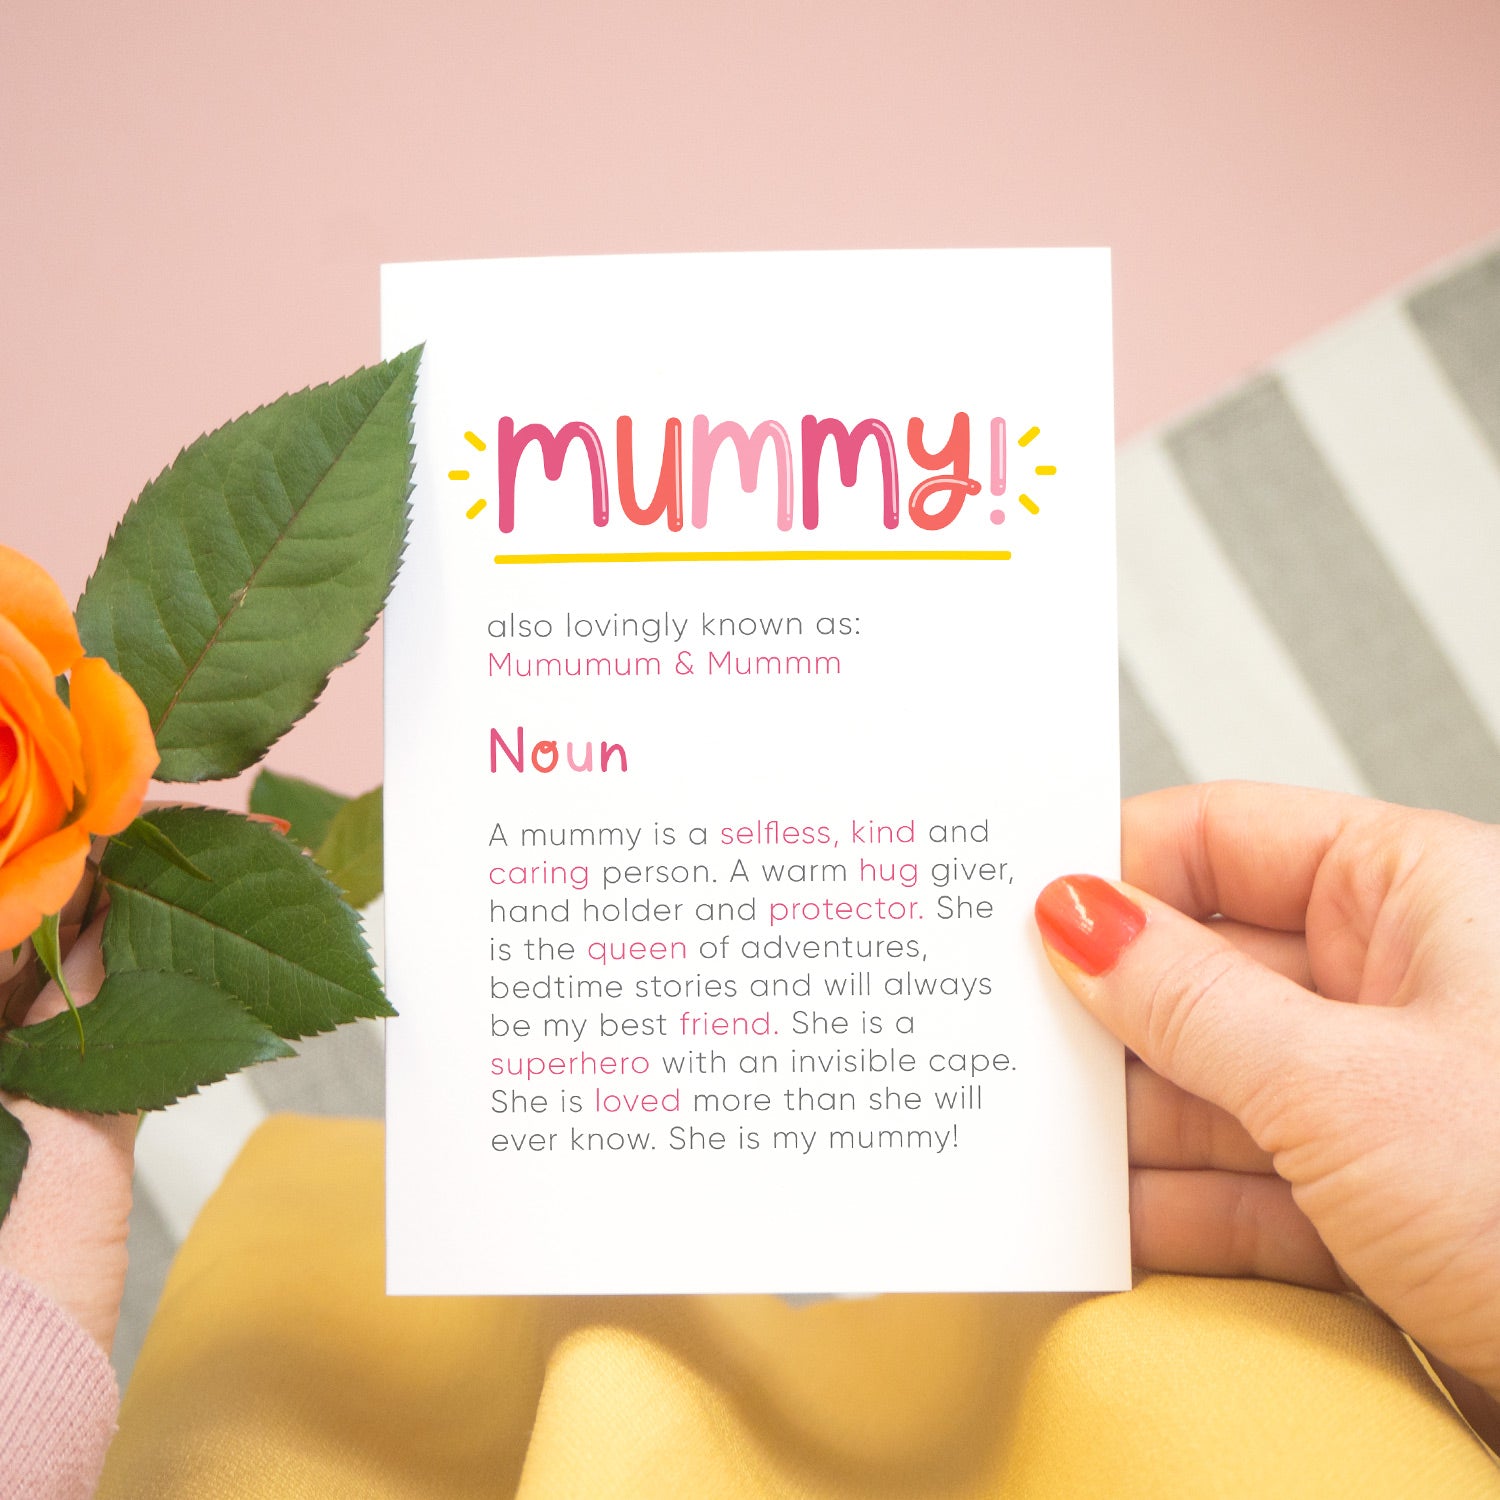 A personalised Mummy dictionary definition card being held over a pink background with a grey and white striped rug, yellow skirt and a single orange rose to the left. The card features hand drawn writing in varying tones of pink and a definition of what a Mummy is with key words highlighted in pink.